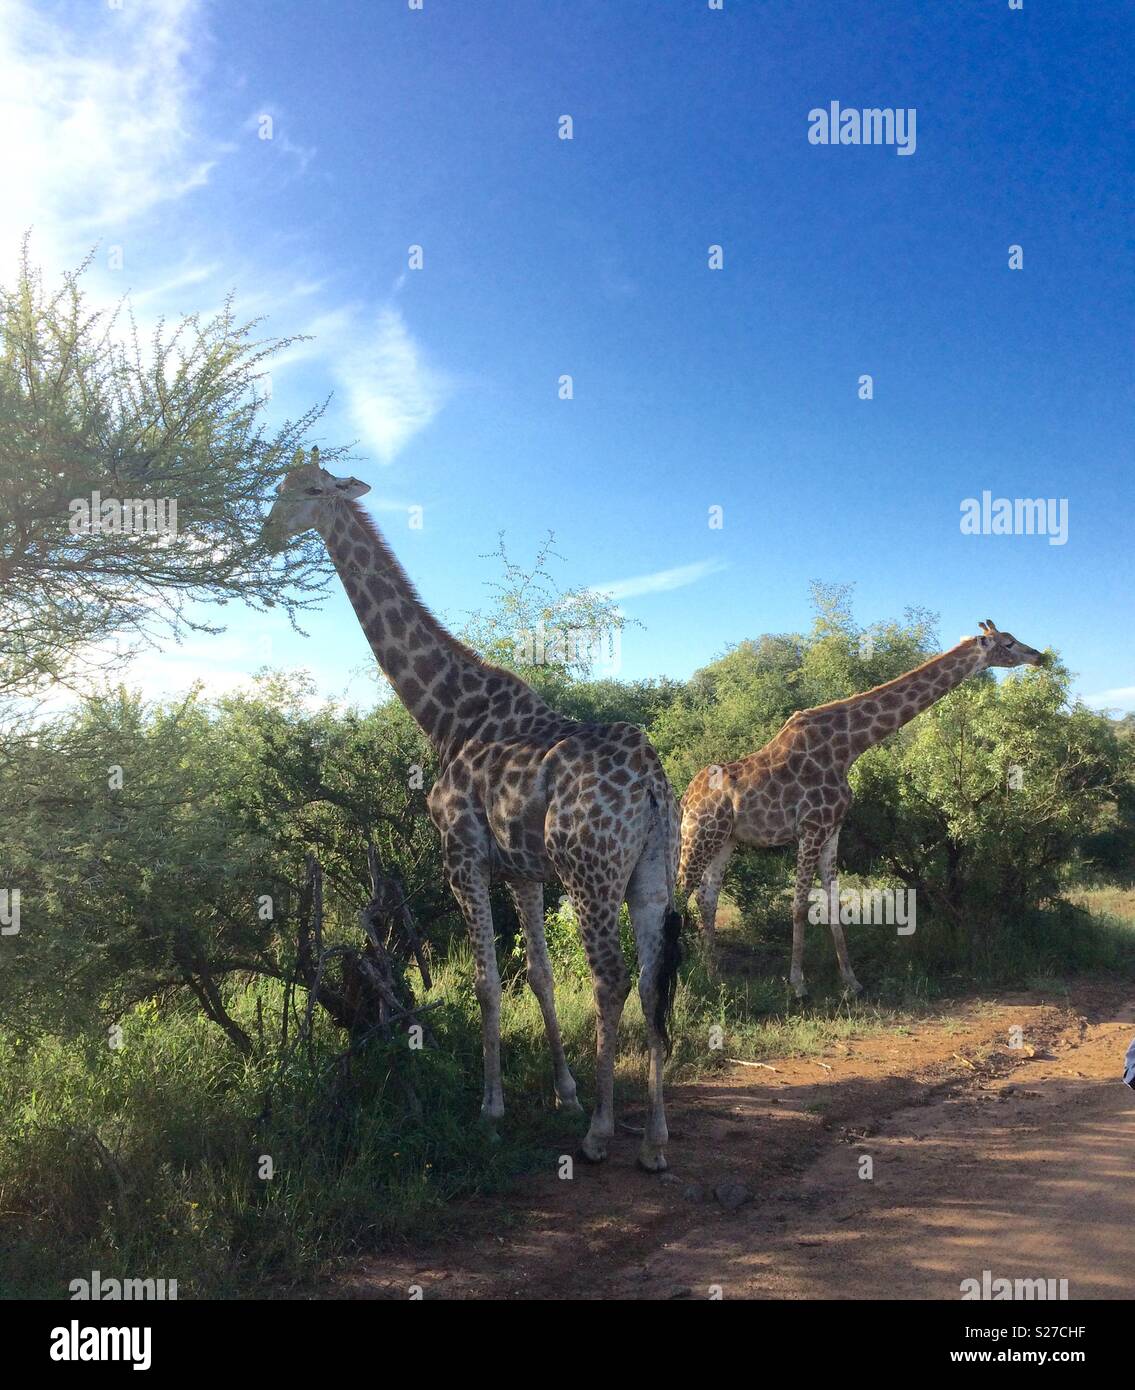 Giraffes eating from a Camelthorn tree in the wild of South Africa Stock Photo